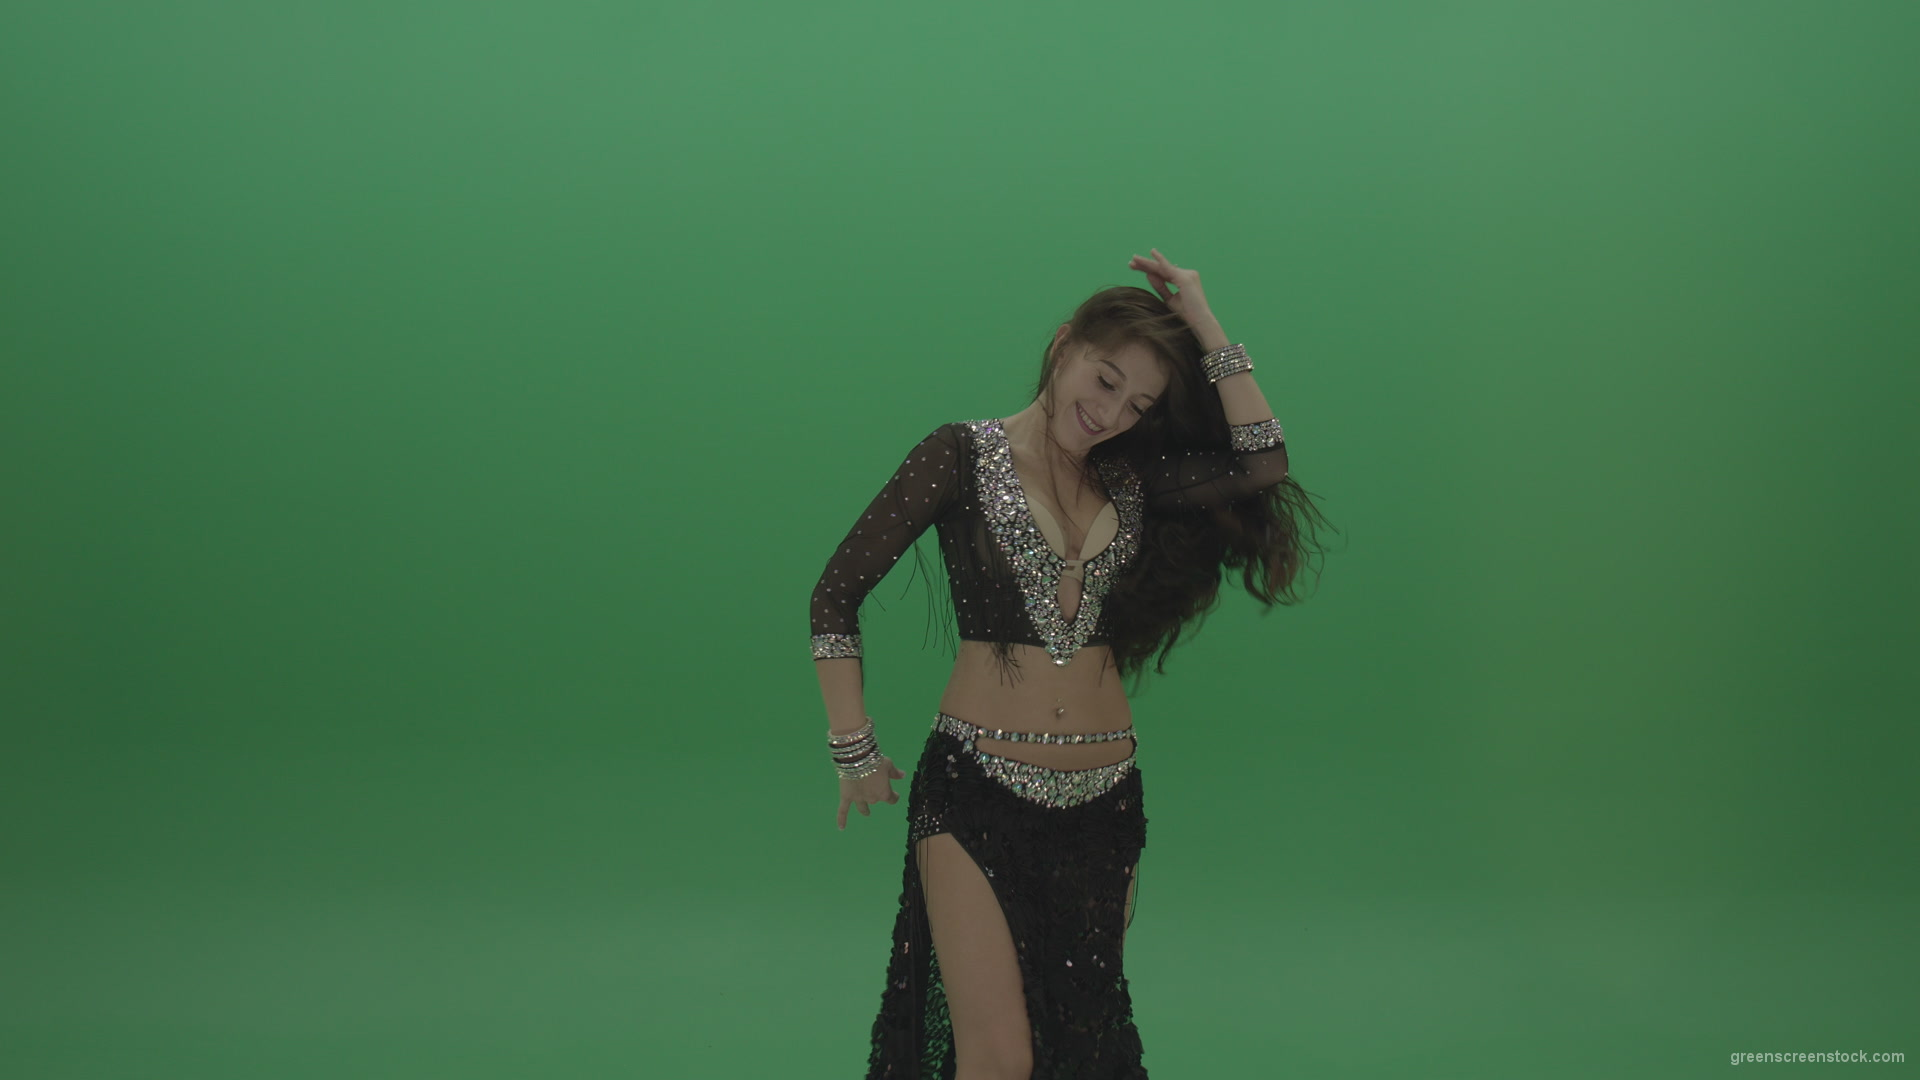 Refined-belly-dancer-in-black-wear-display-amazing-dance-moves-over-chromakey-background_009 Green Screen Stock